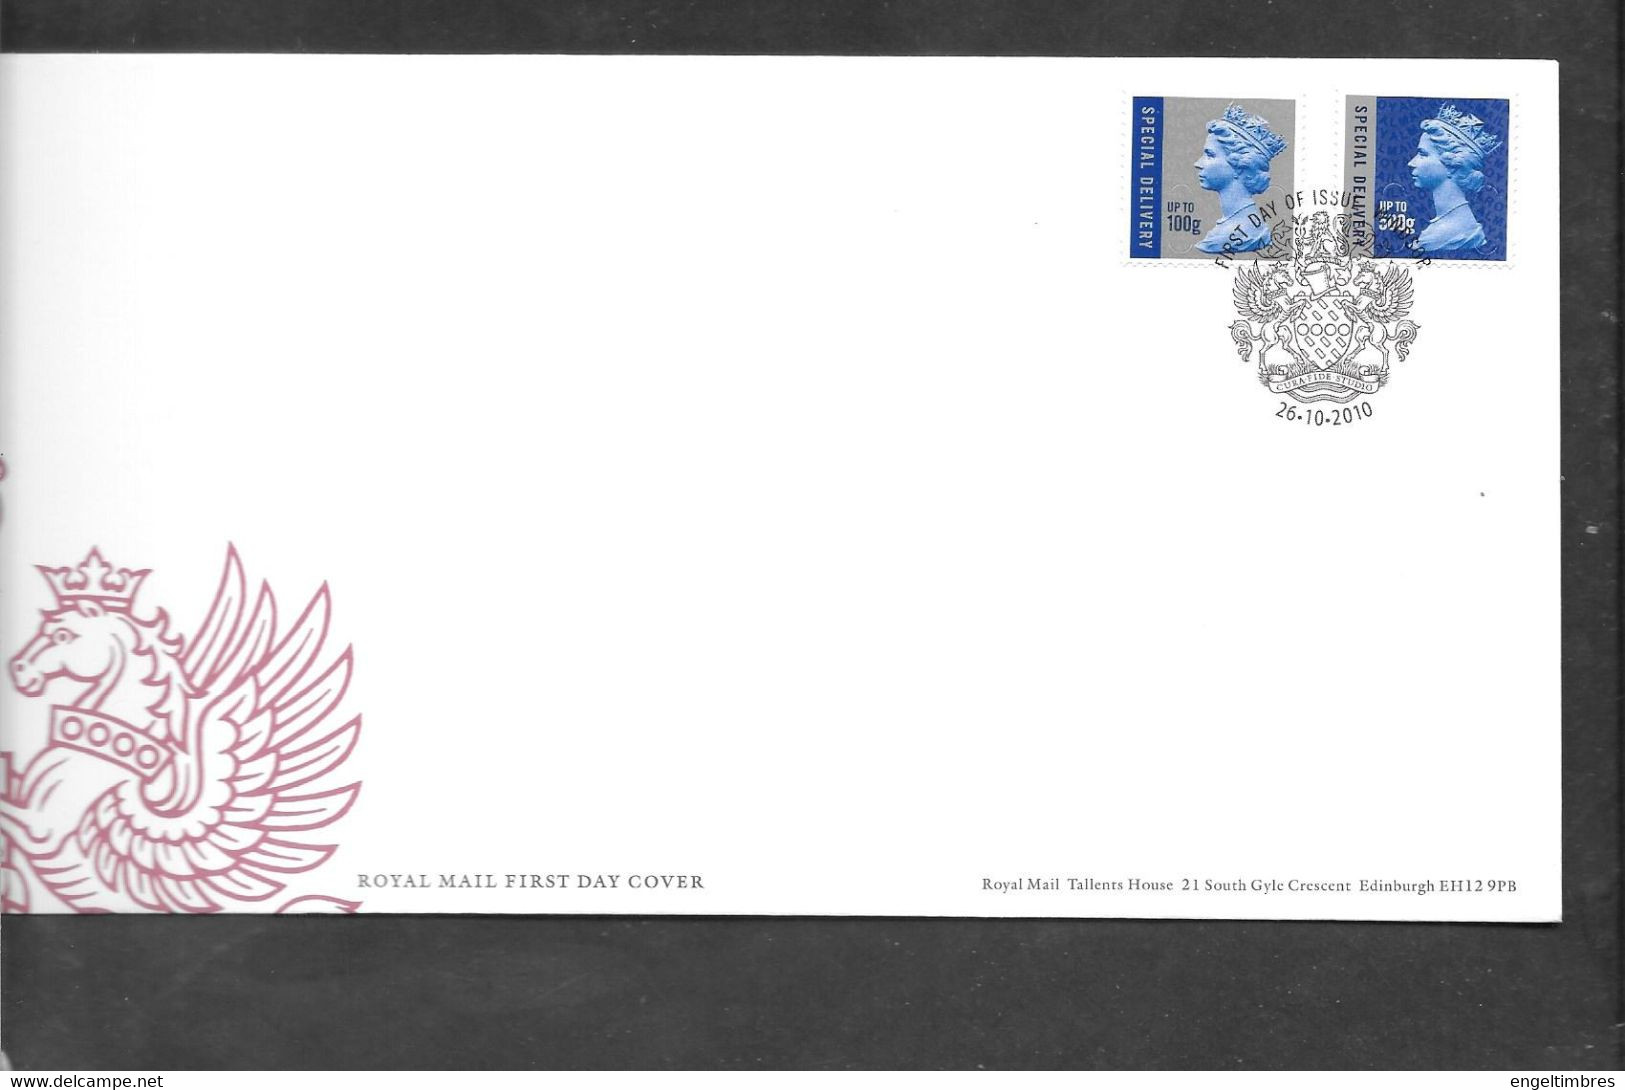 GB - 2010-  New Definitive Values (2) SPECIAL DELIVEREY   FDC Or  USED  "ON PIECE" - SEE NOTES  And Scans - 2001-2010 Decimal Issues